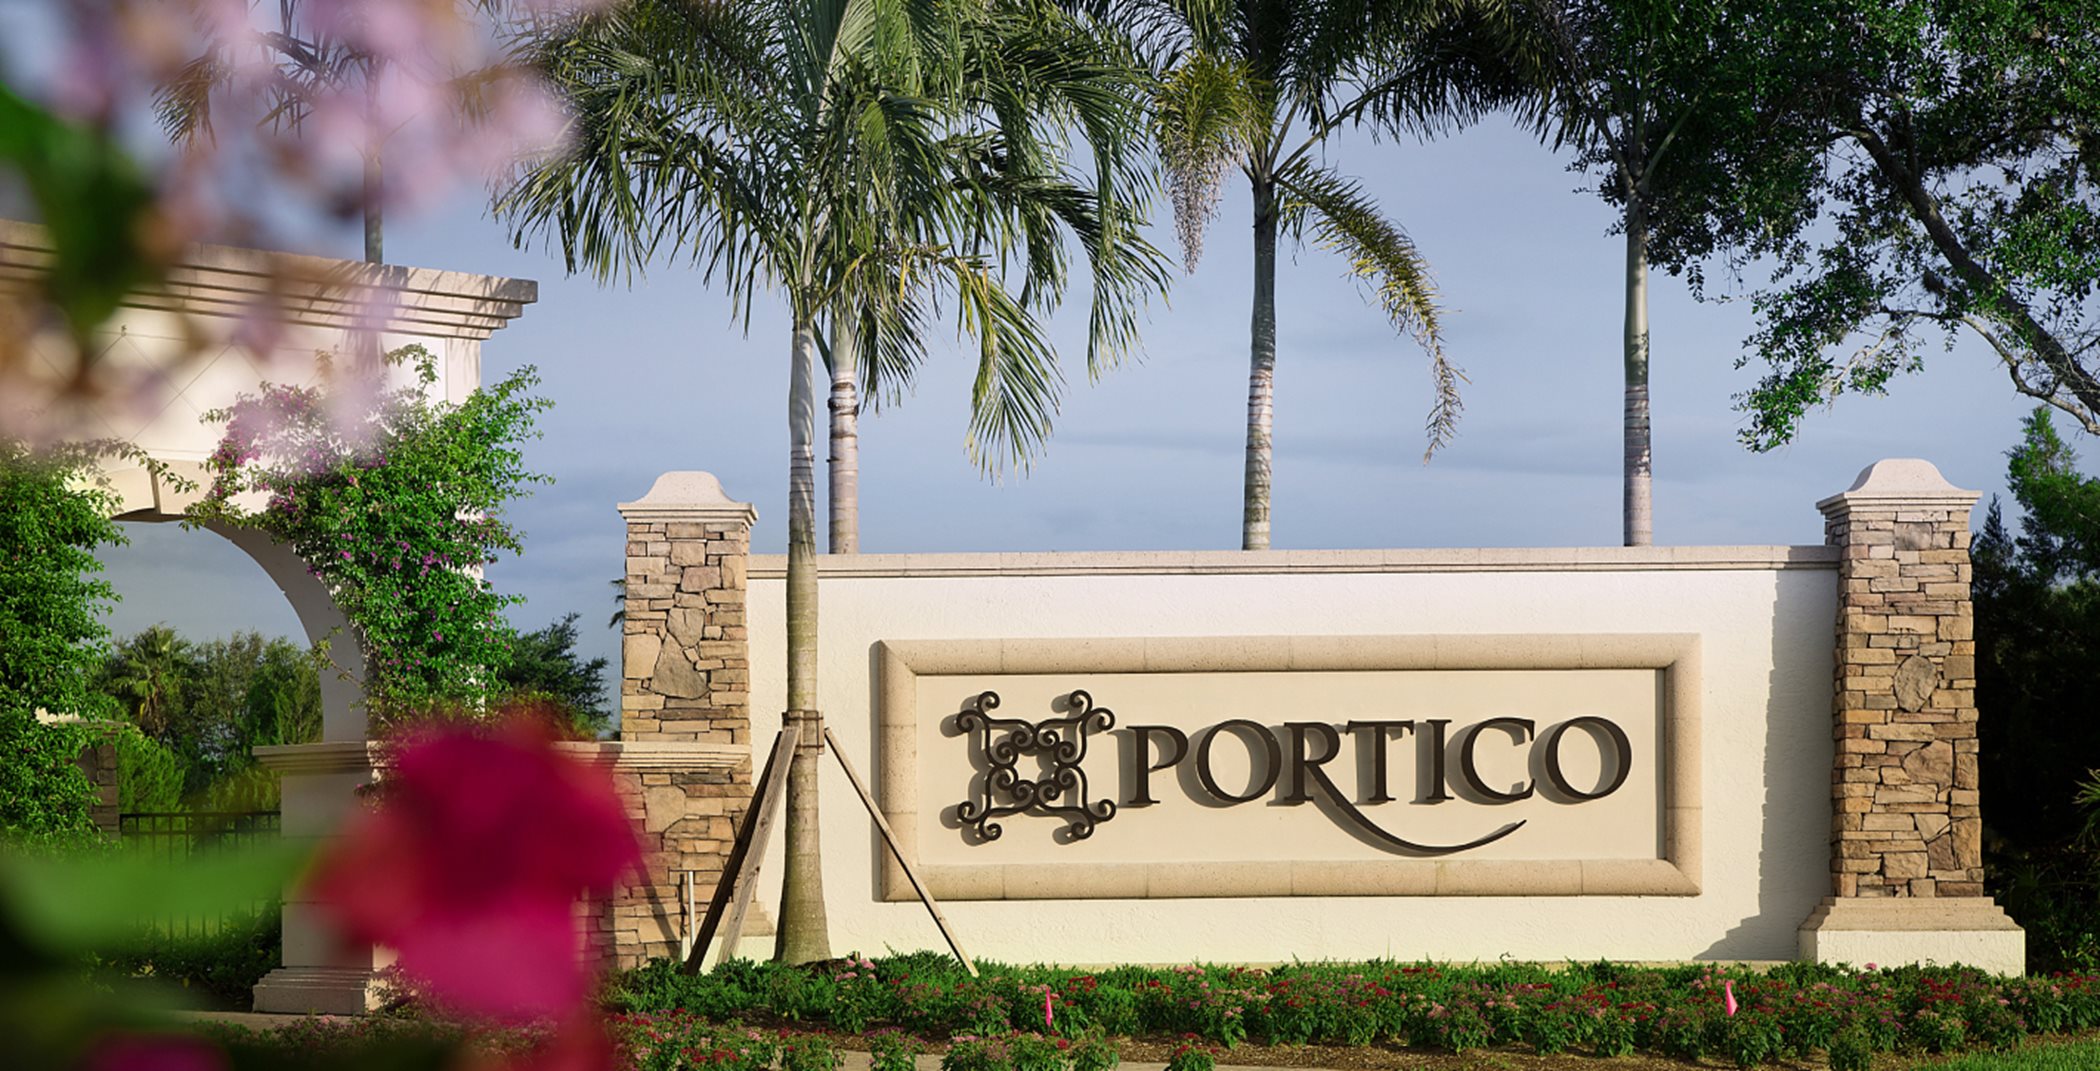 Portico entry sign